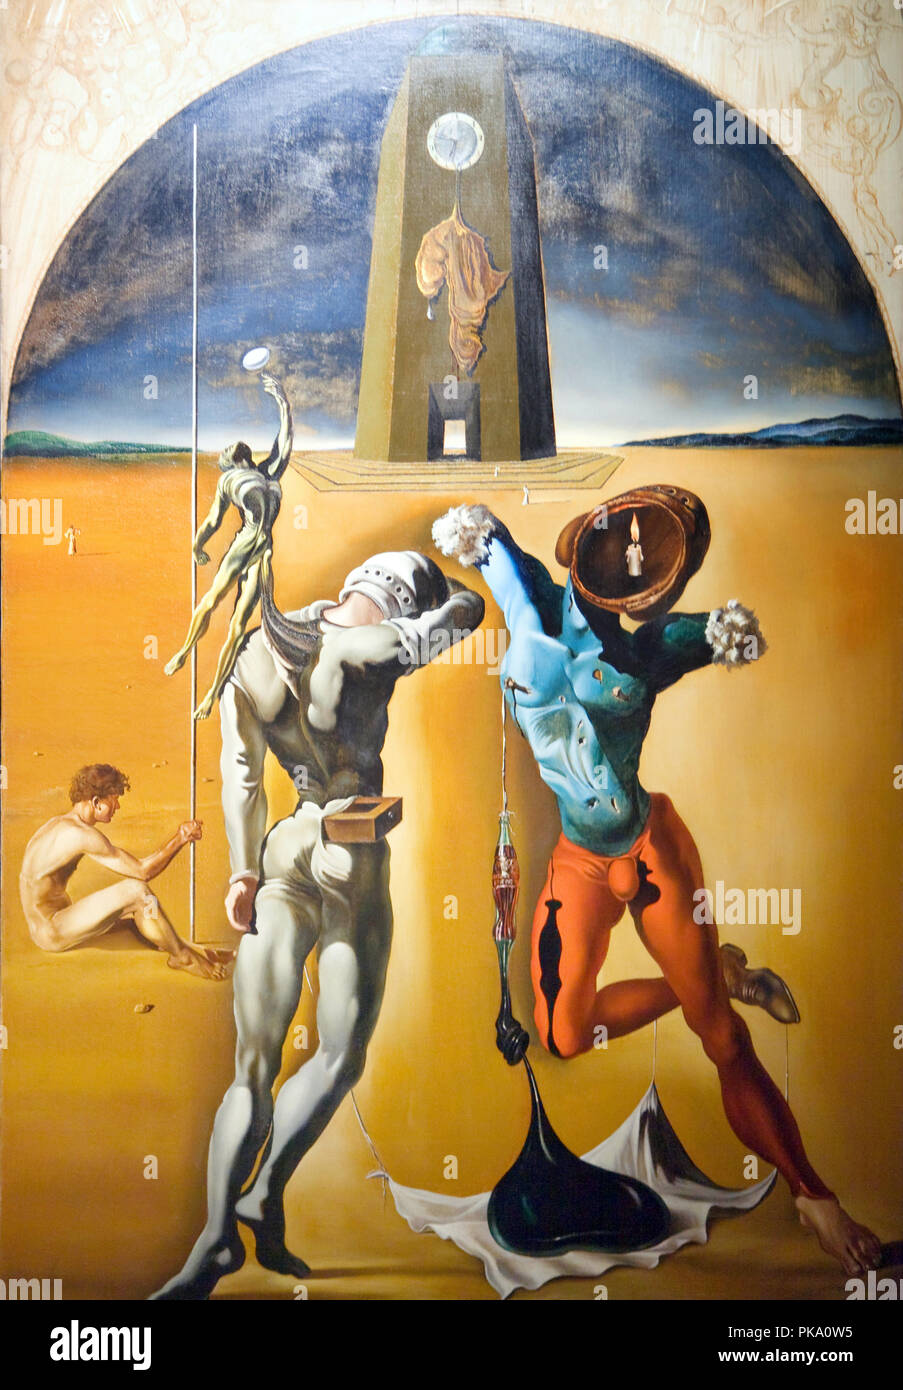 paintings in the house of dali in spain Stock Photo